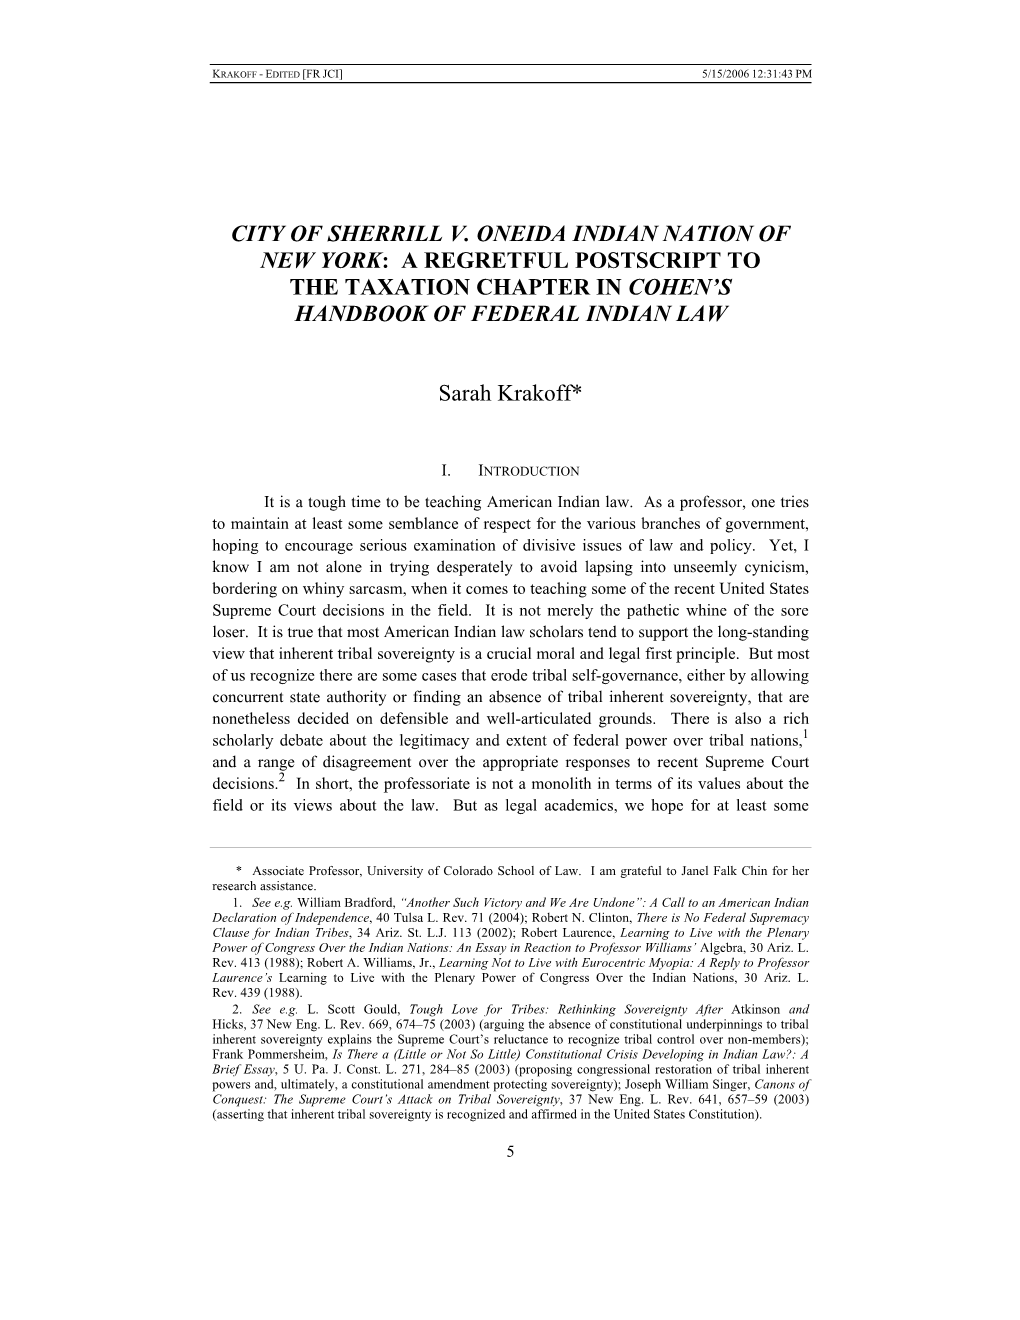 City of Sherrill V. Oneida Indian Nation of New York: a Regretful Postscript to the Taxation Chapter in Cohen’S Handbook of Federal Indian Law